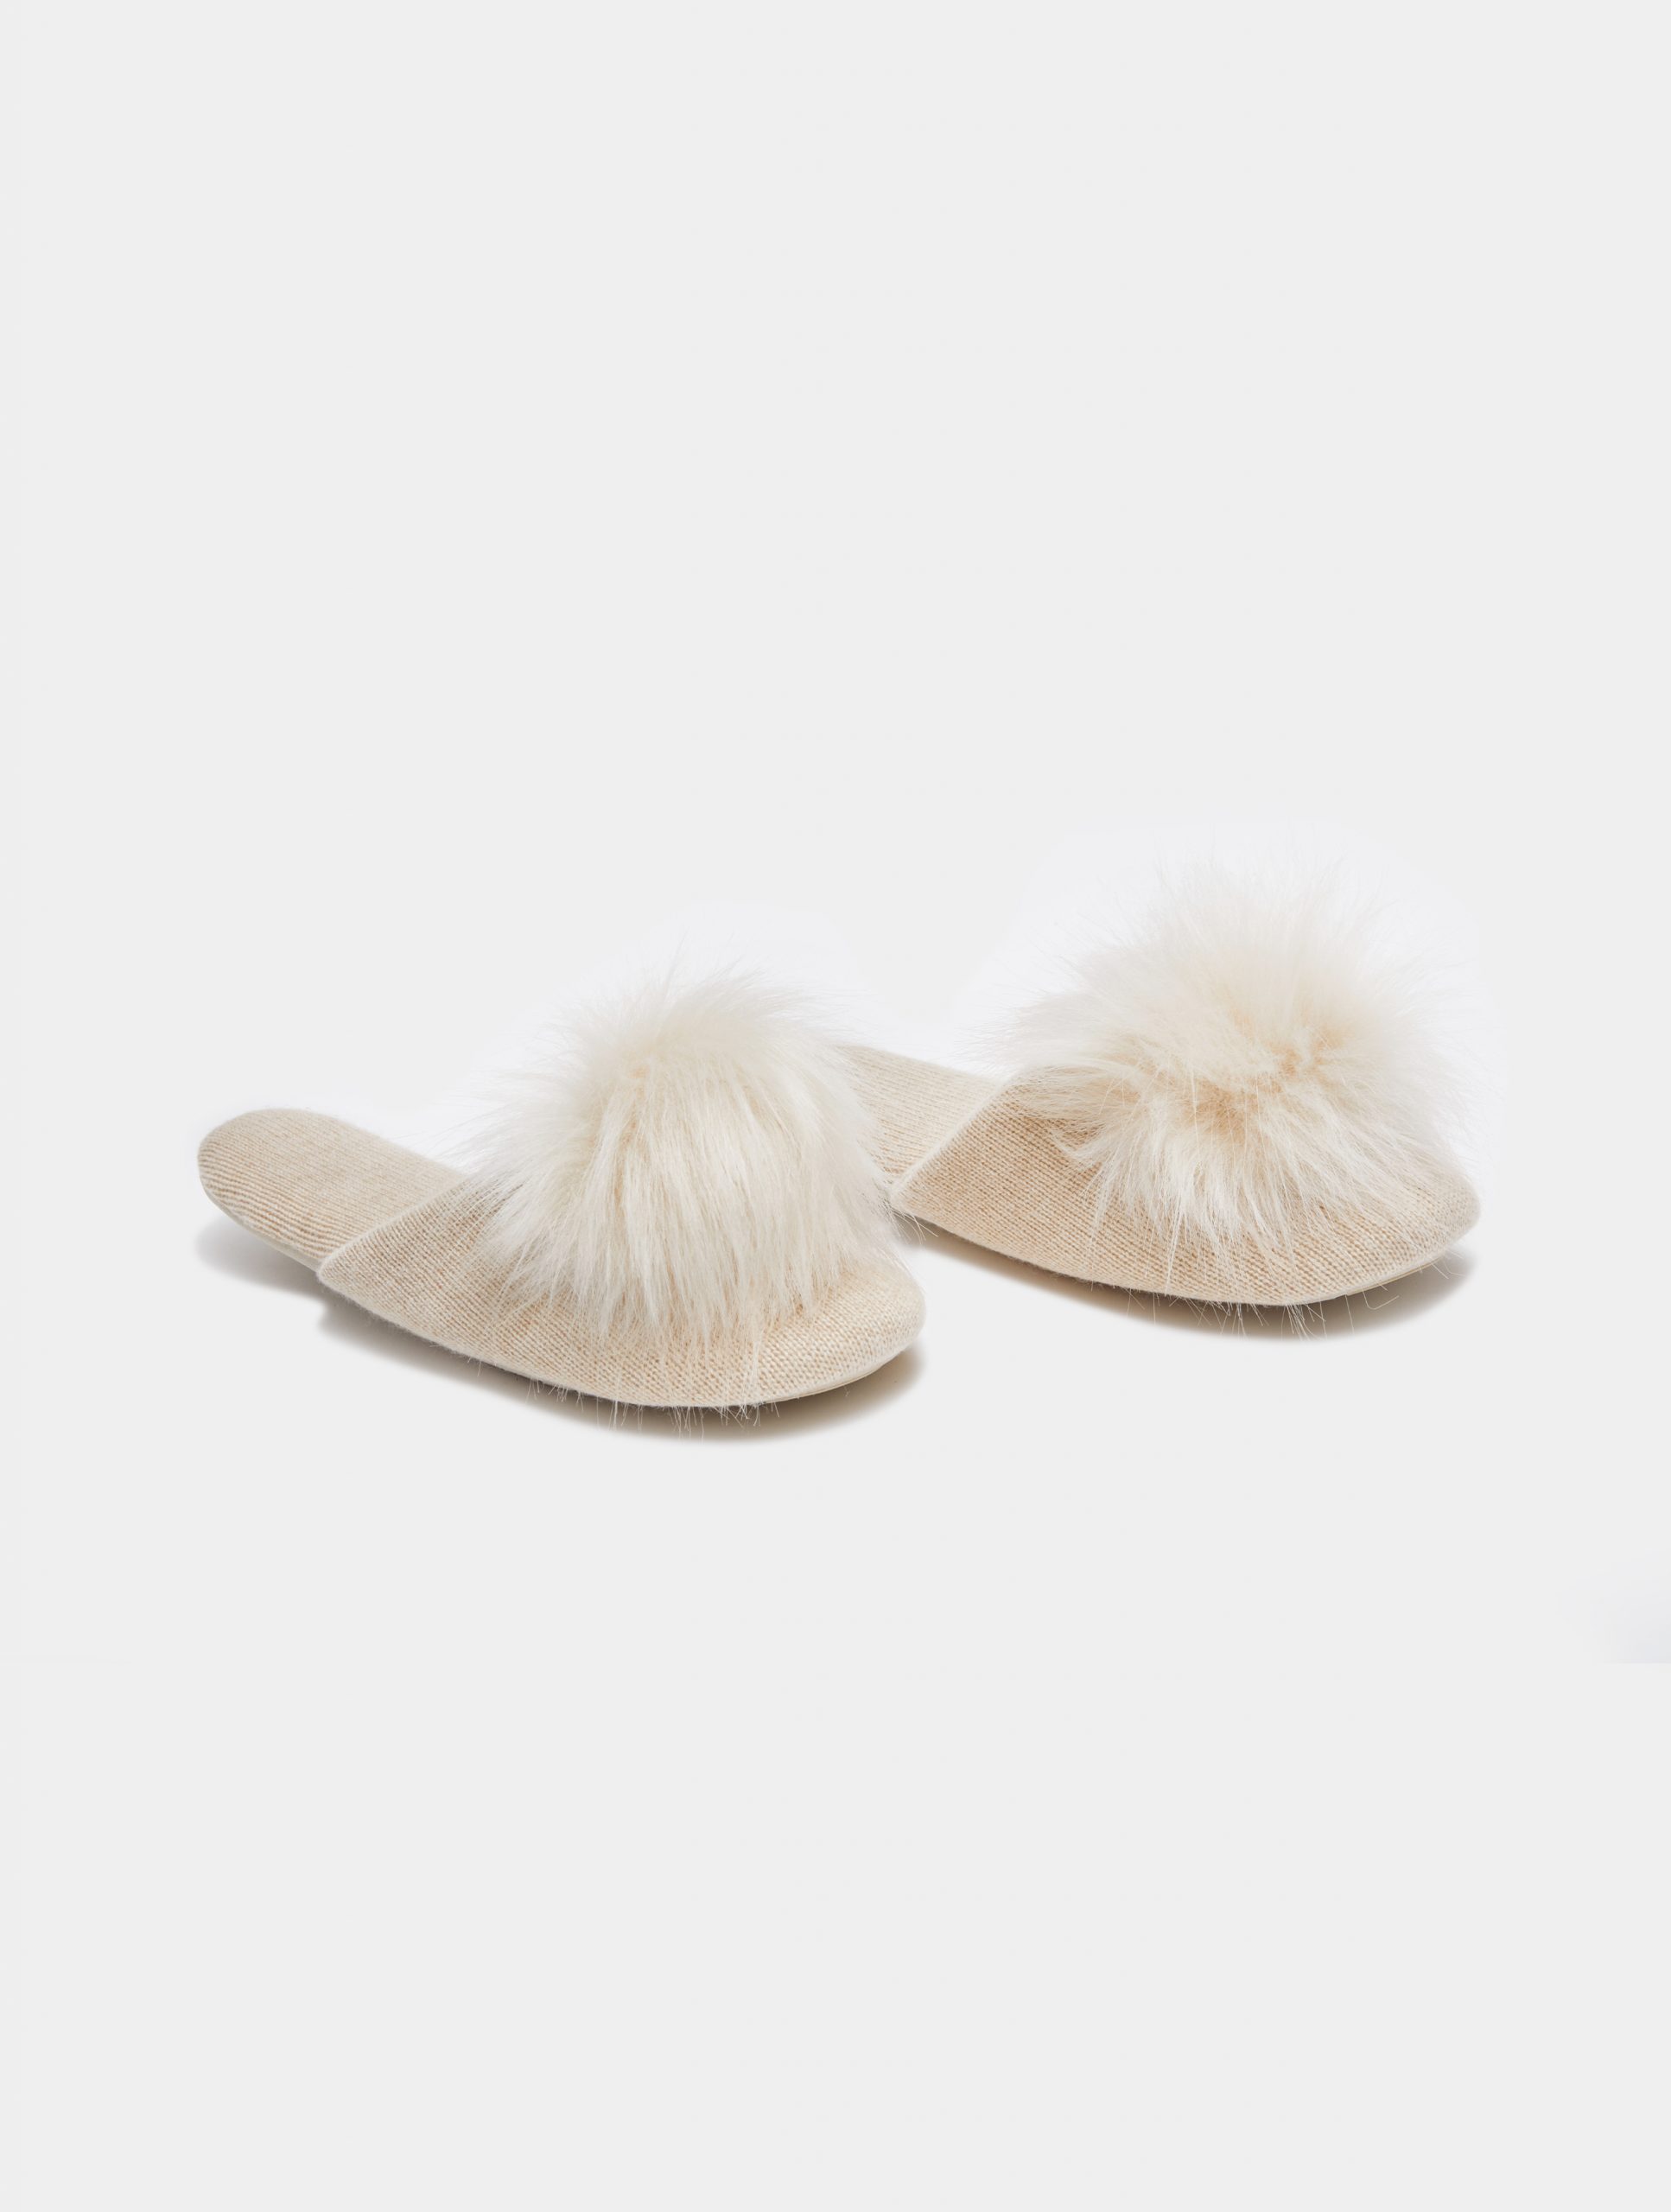 Cashmere Indoor Slippers - Ultra Comfy Home - Nap